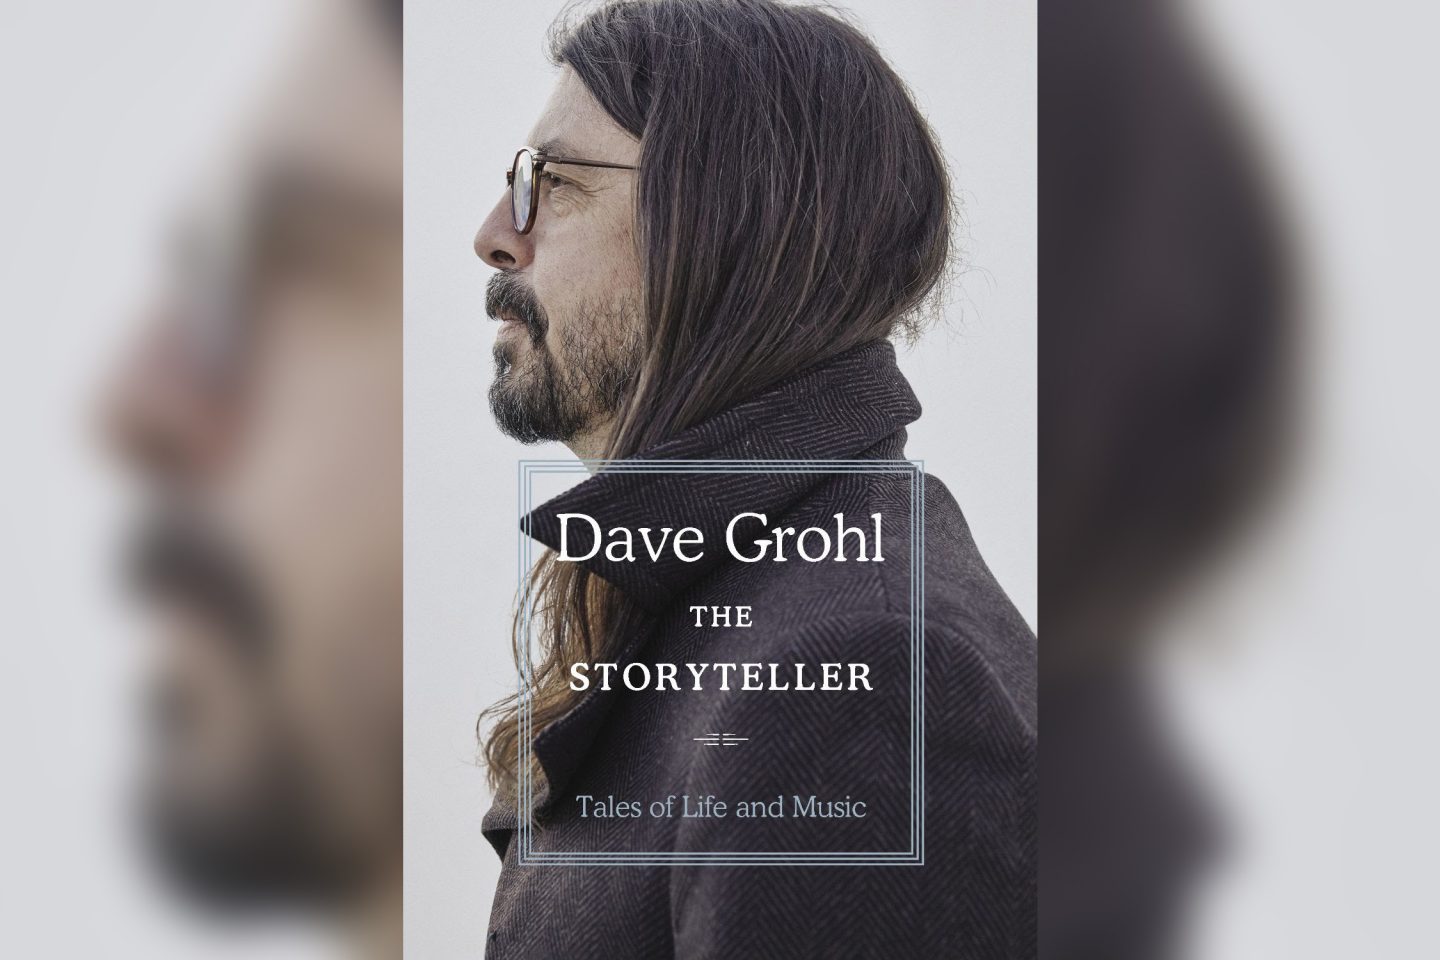 Dave Grohl To Publish New Book ‘The Storyteller’